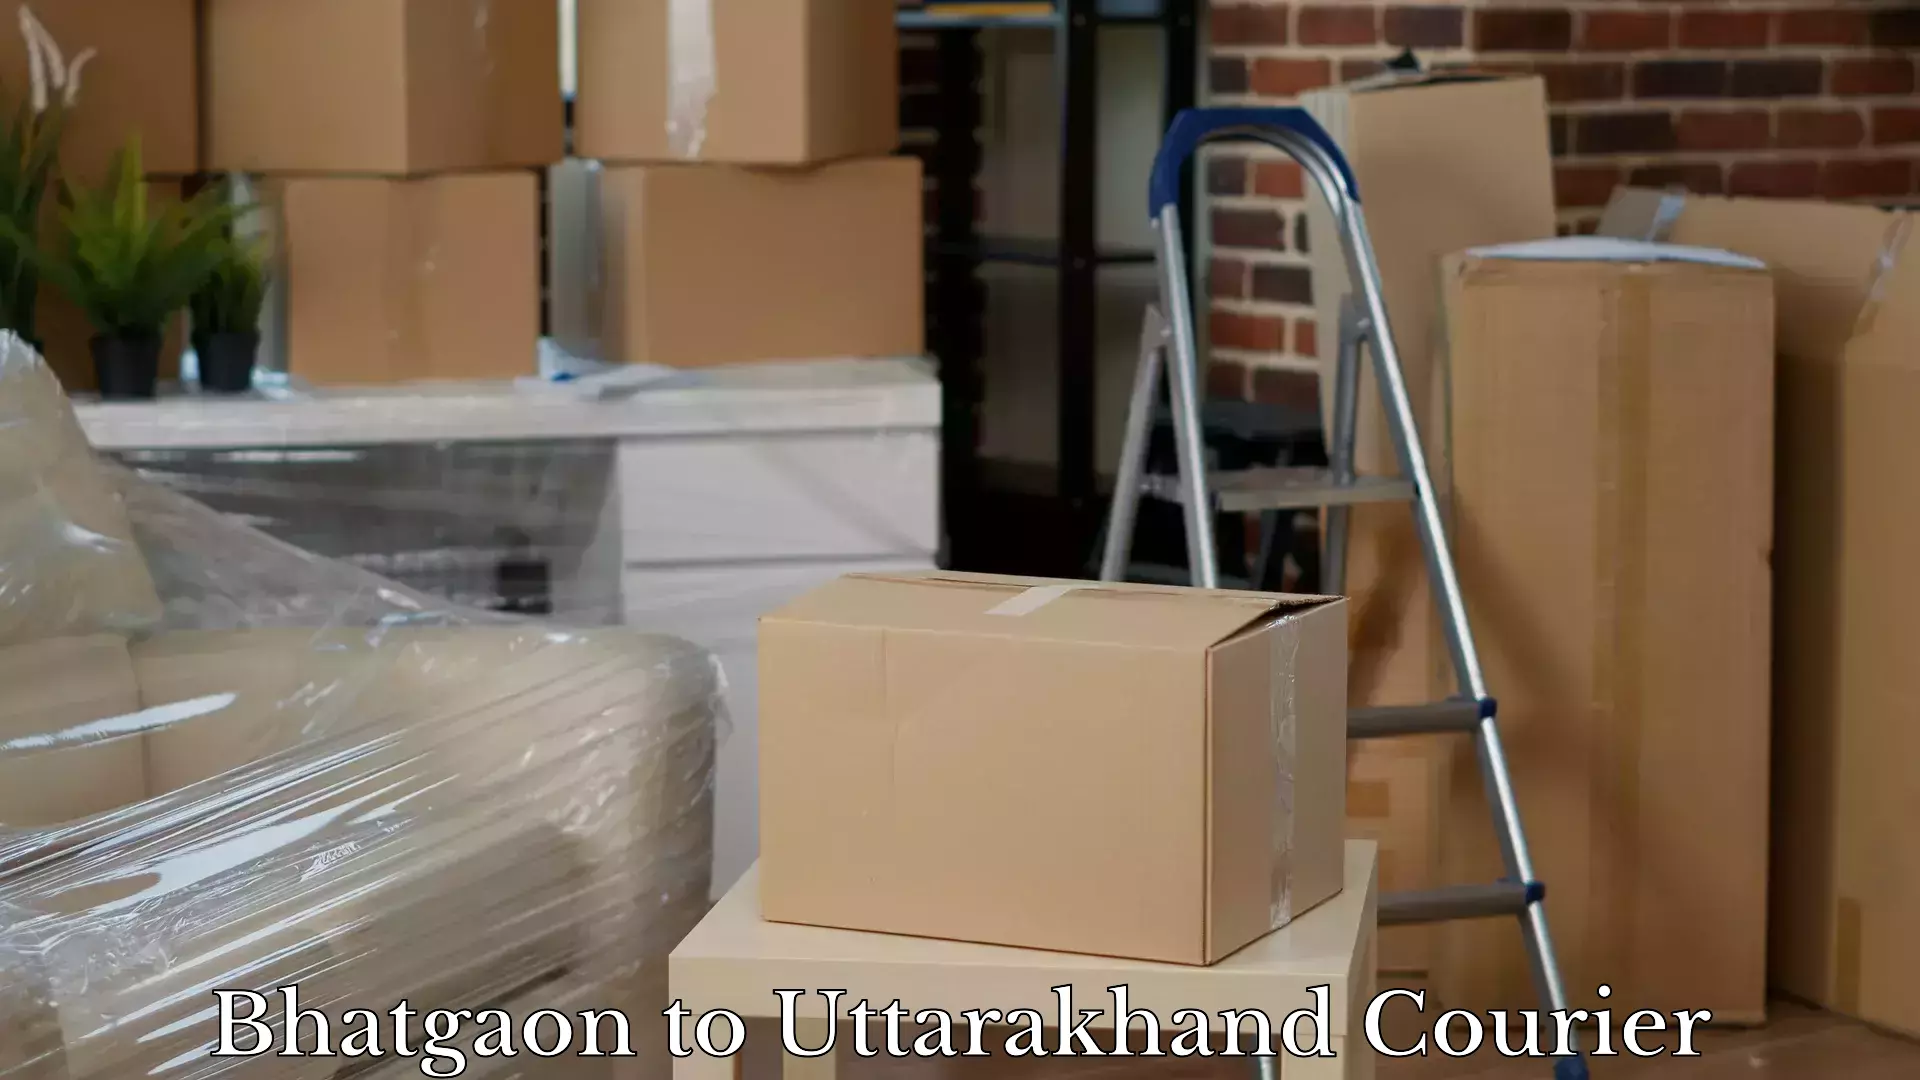 Instant baggage transport quote Bhatgaon to Pauri Garhwal